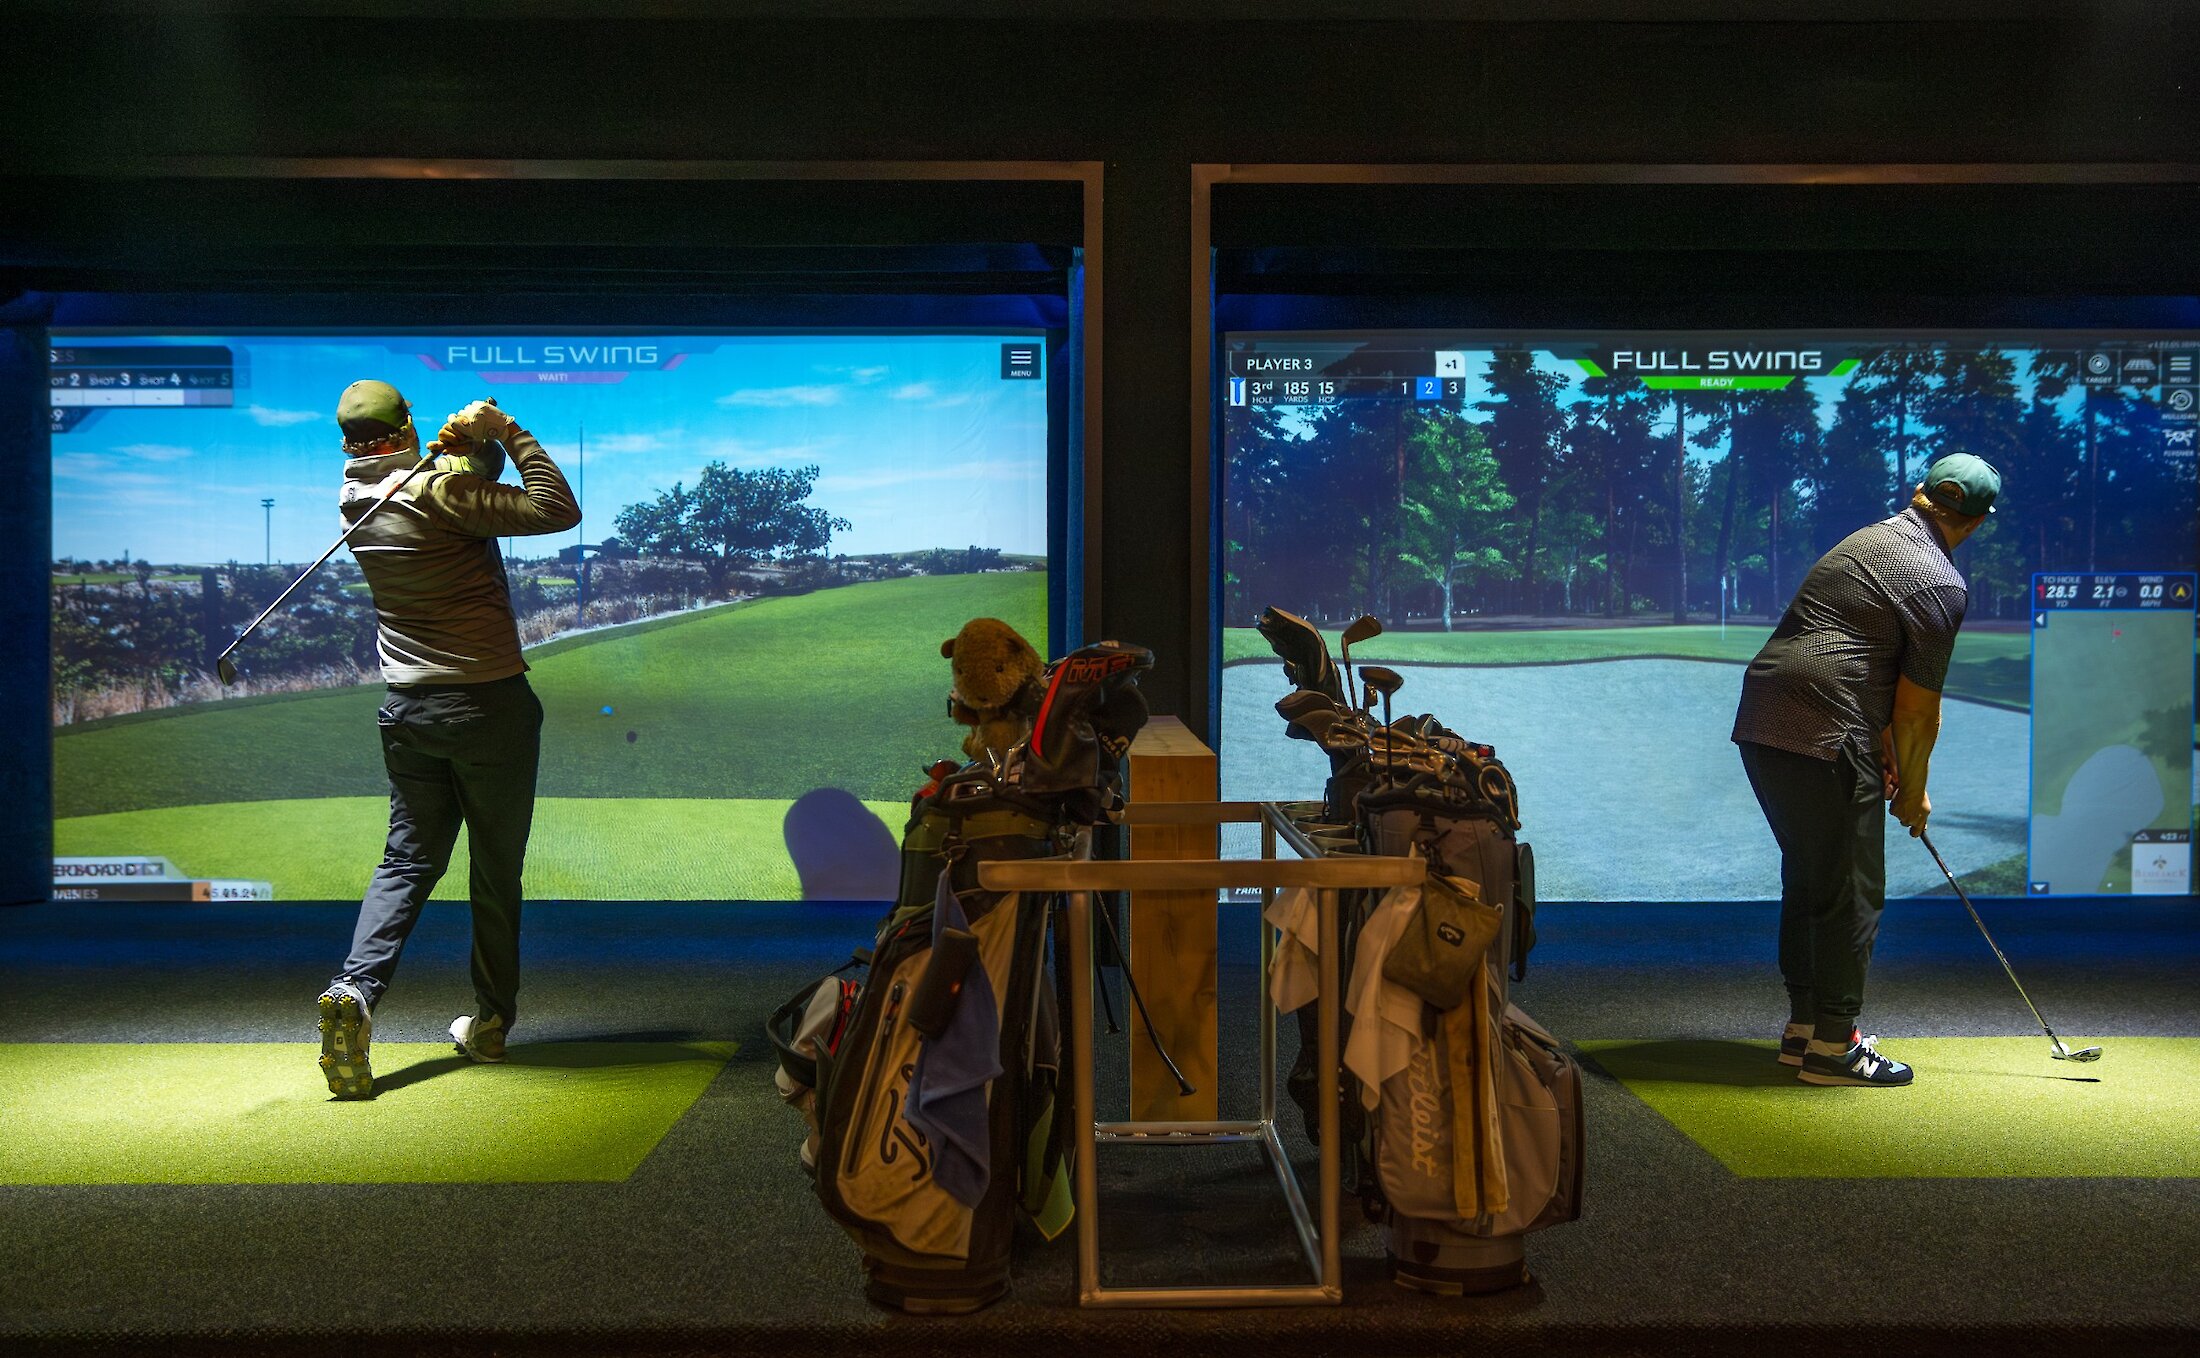 People golfing indoors in front of large screens at the "Pacific Sim" golf simulator.